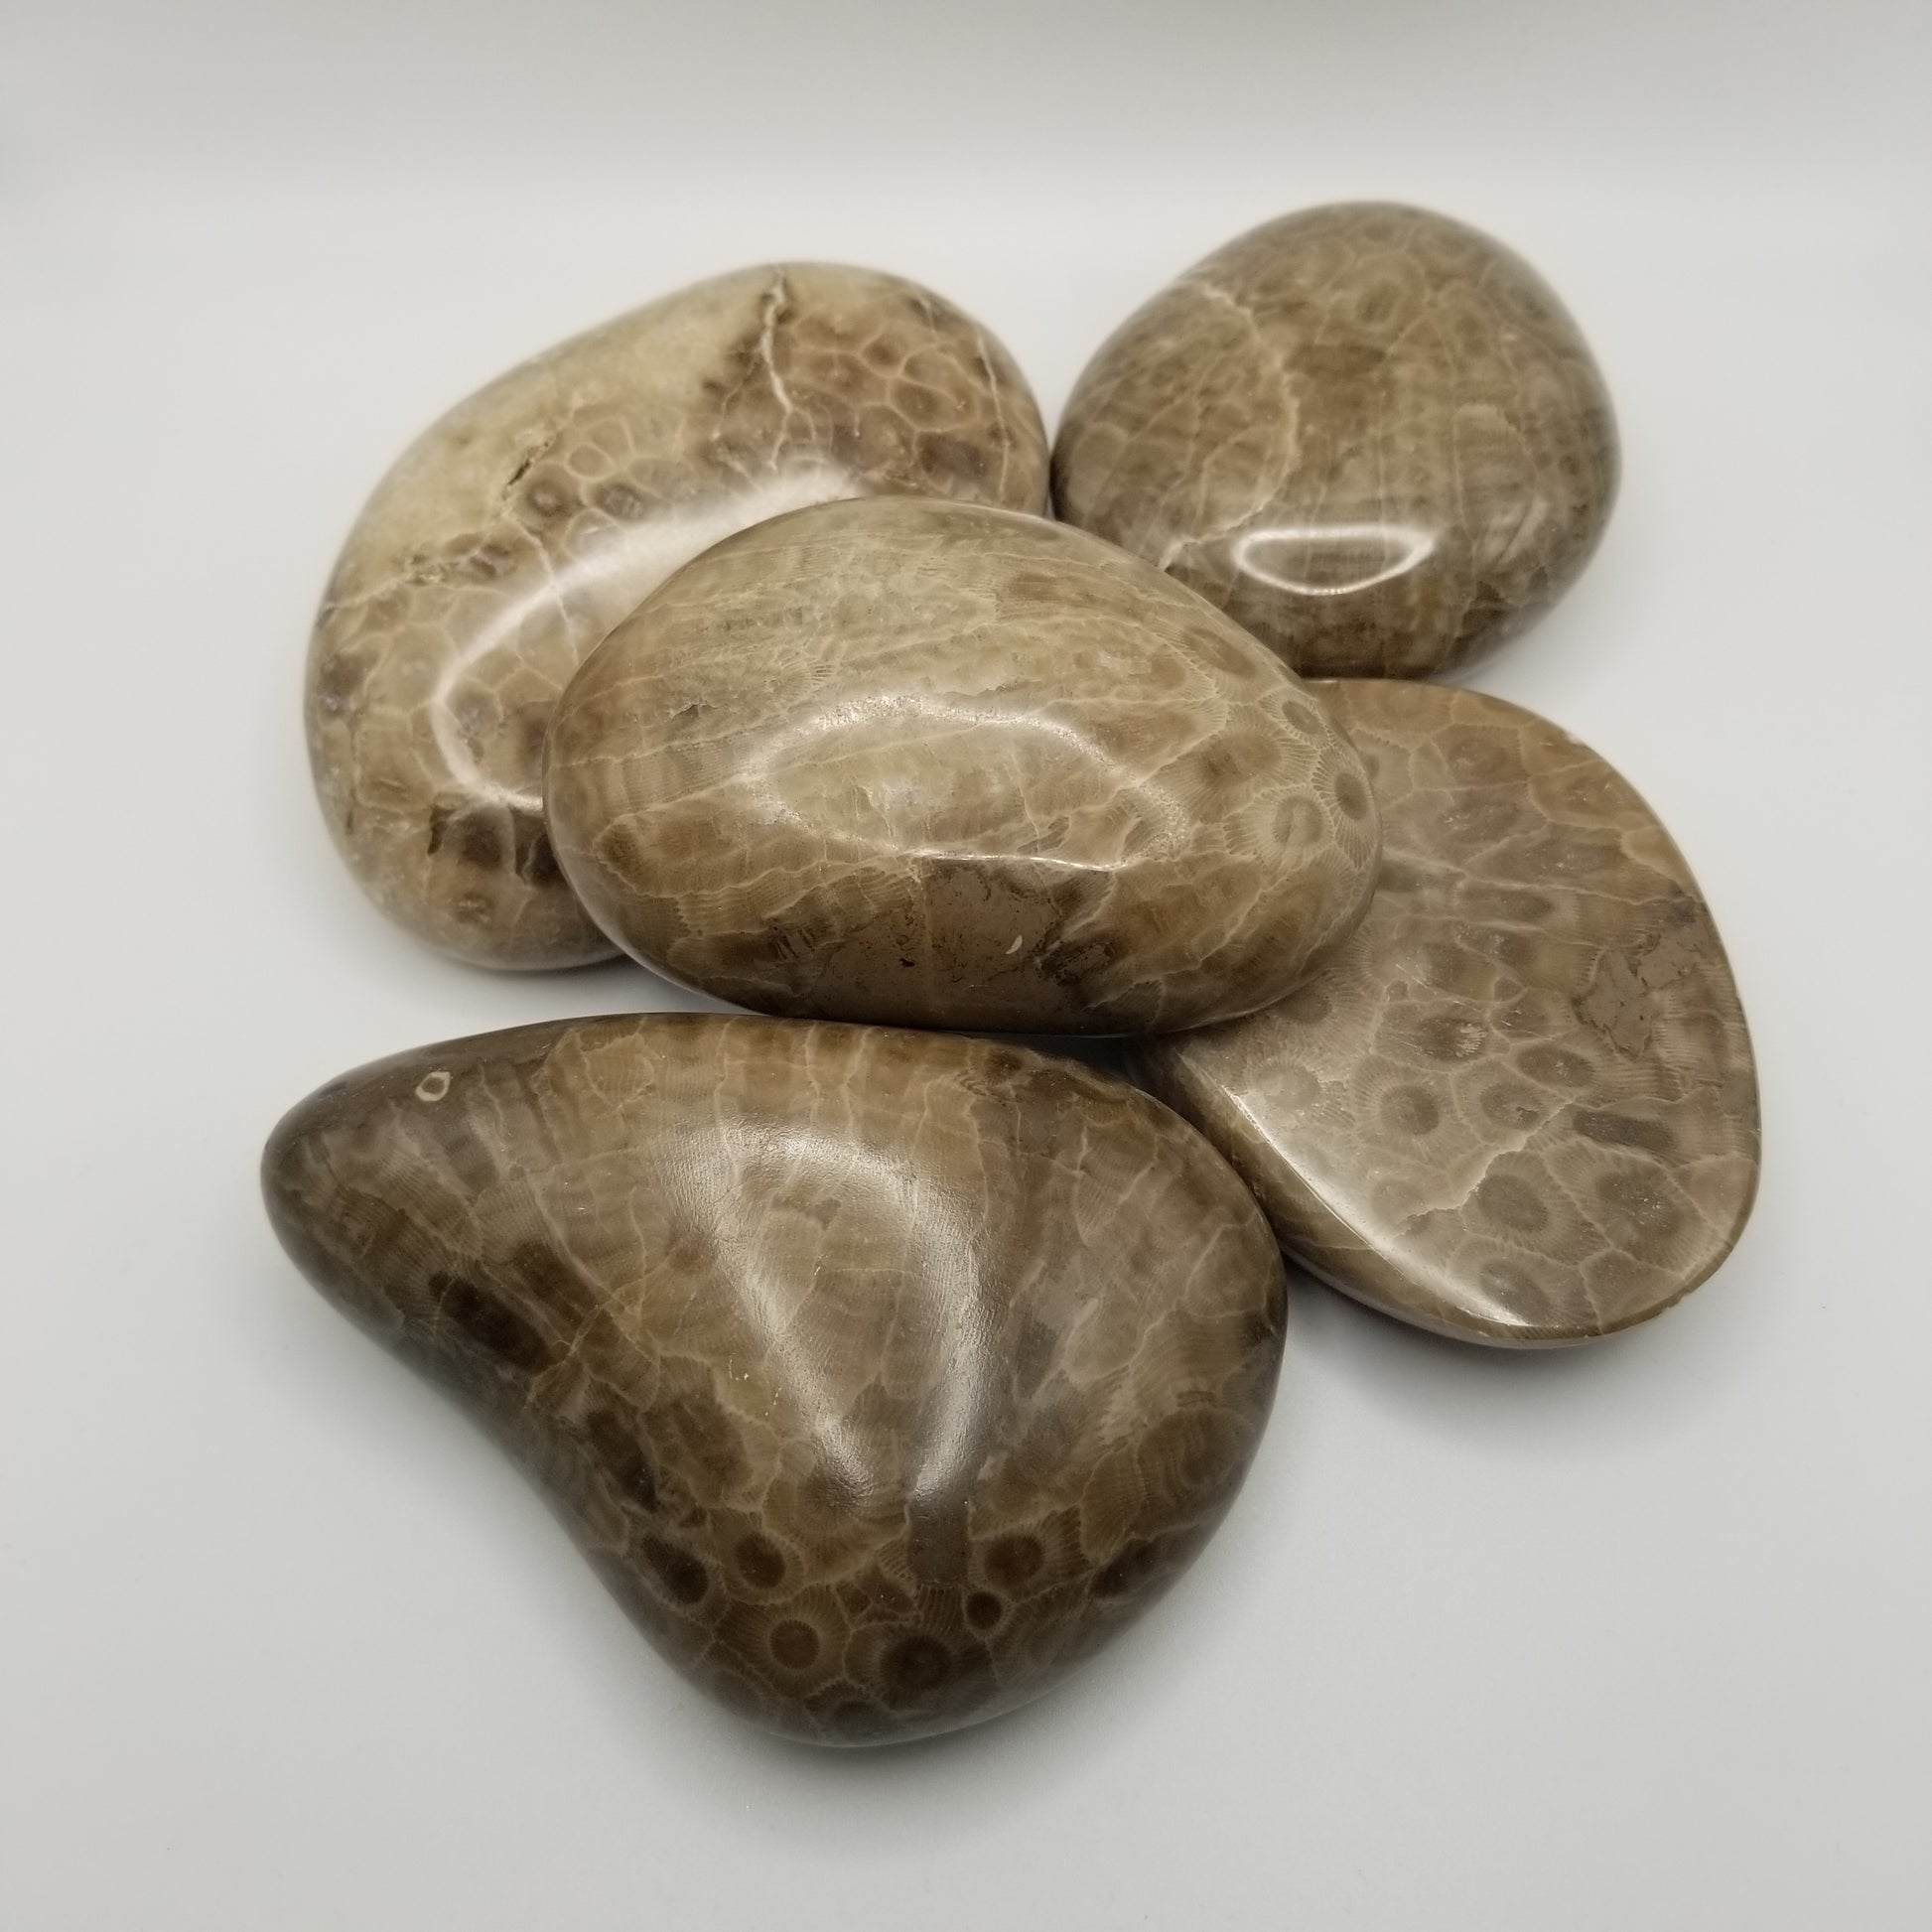 Five fully polished petoskey stones piled up with a beautiful light glare lighting them all up. Michigan's state stone. $40 and up each.